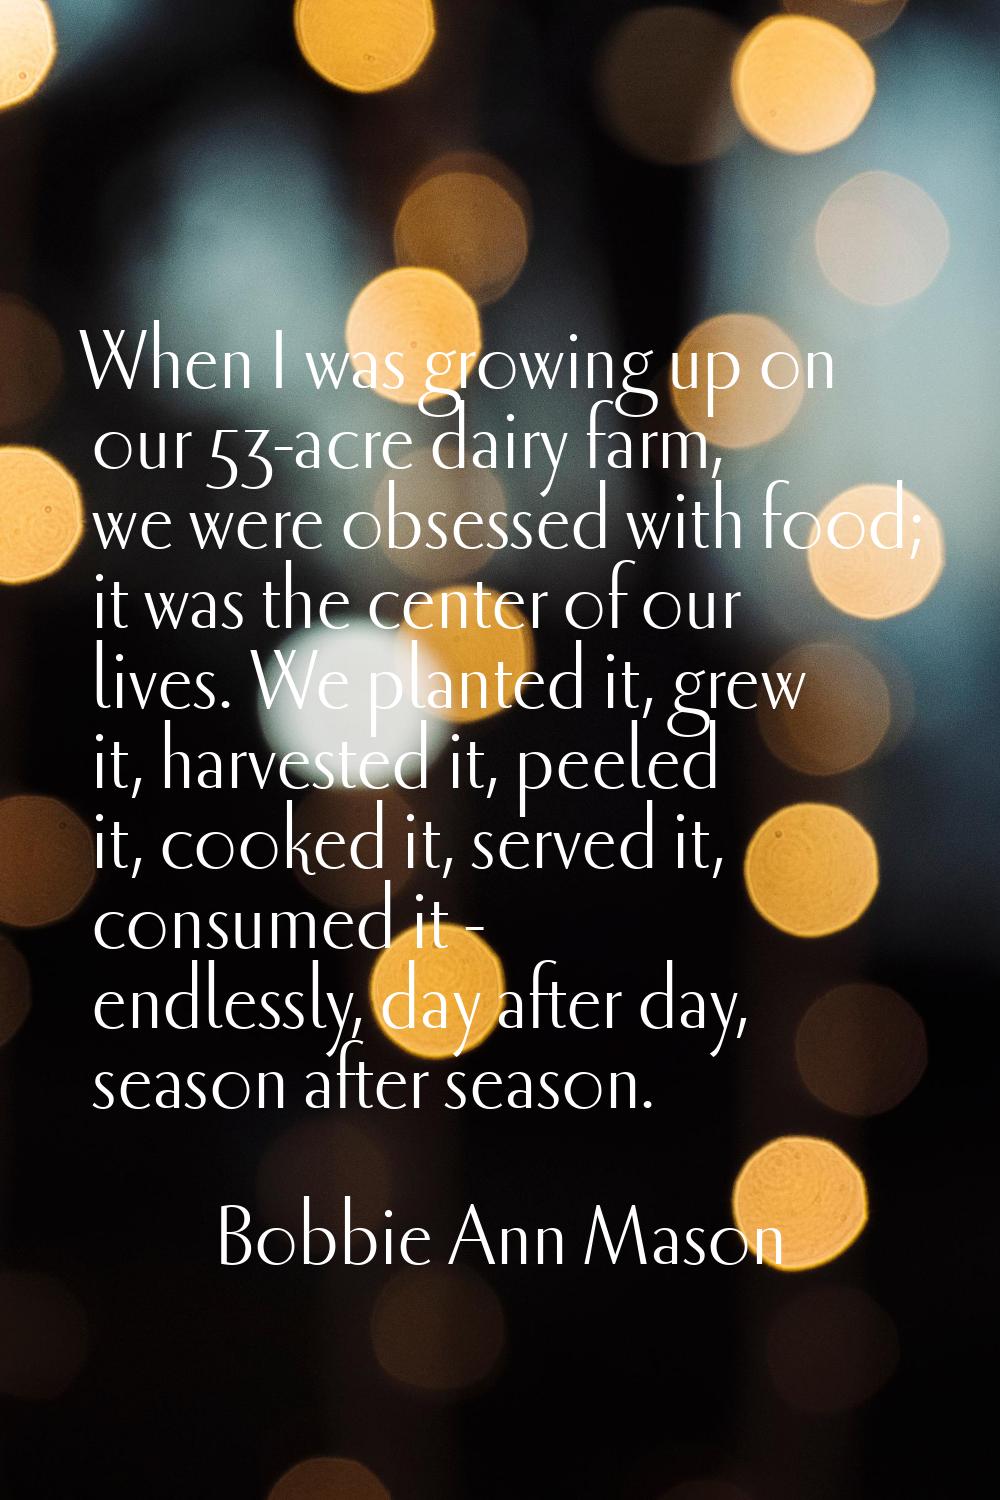 When I was growing up on our 53-acre dairy farm, we were obsessed with food; it was the center of o